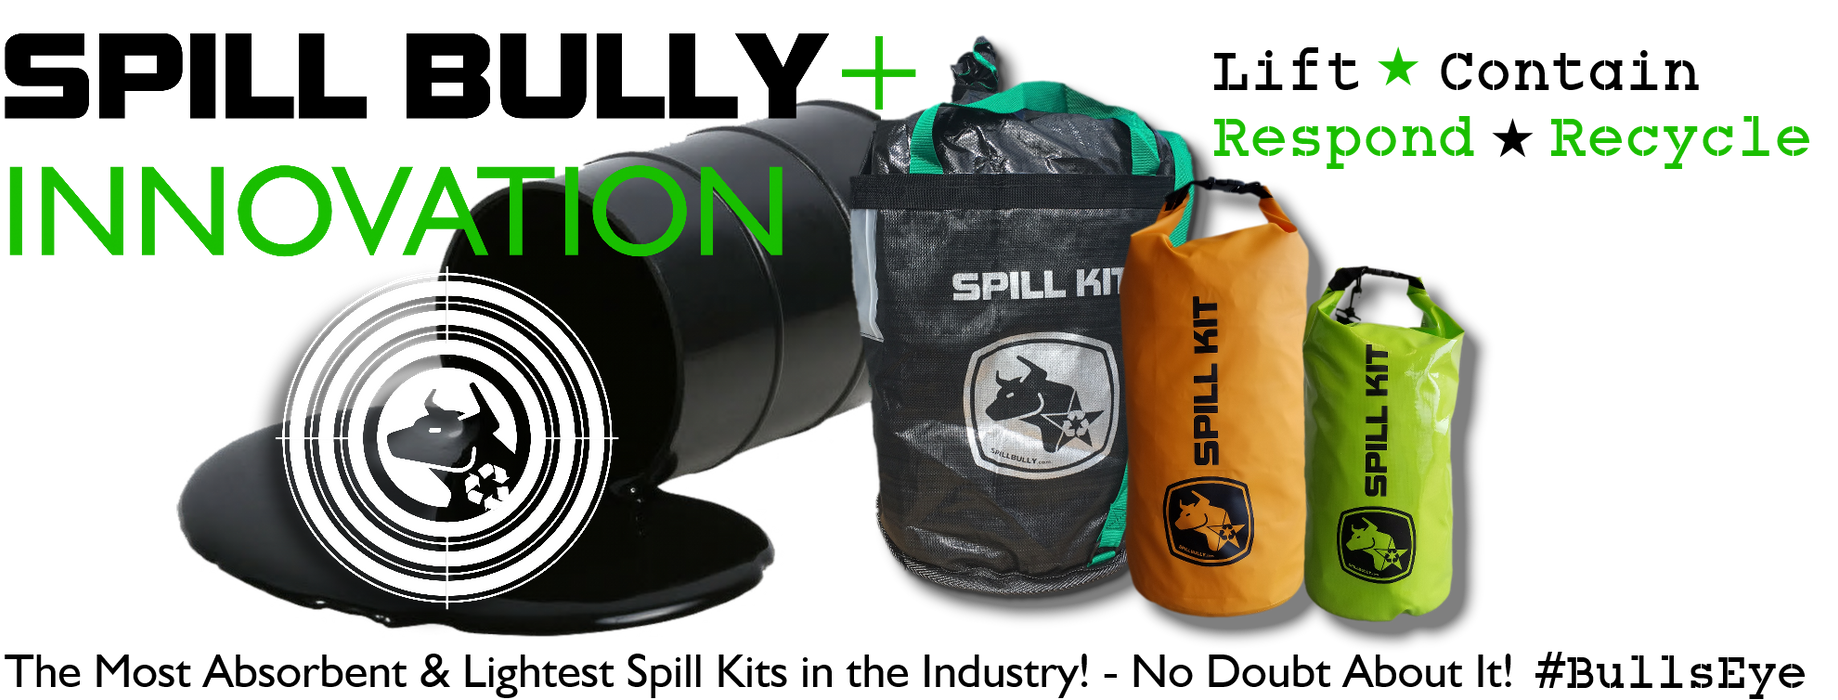 Spill Kits - Consolidated Containment